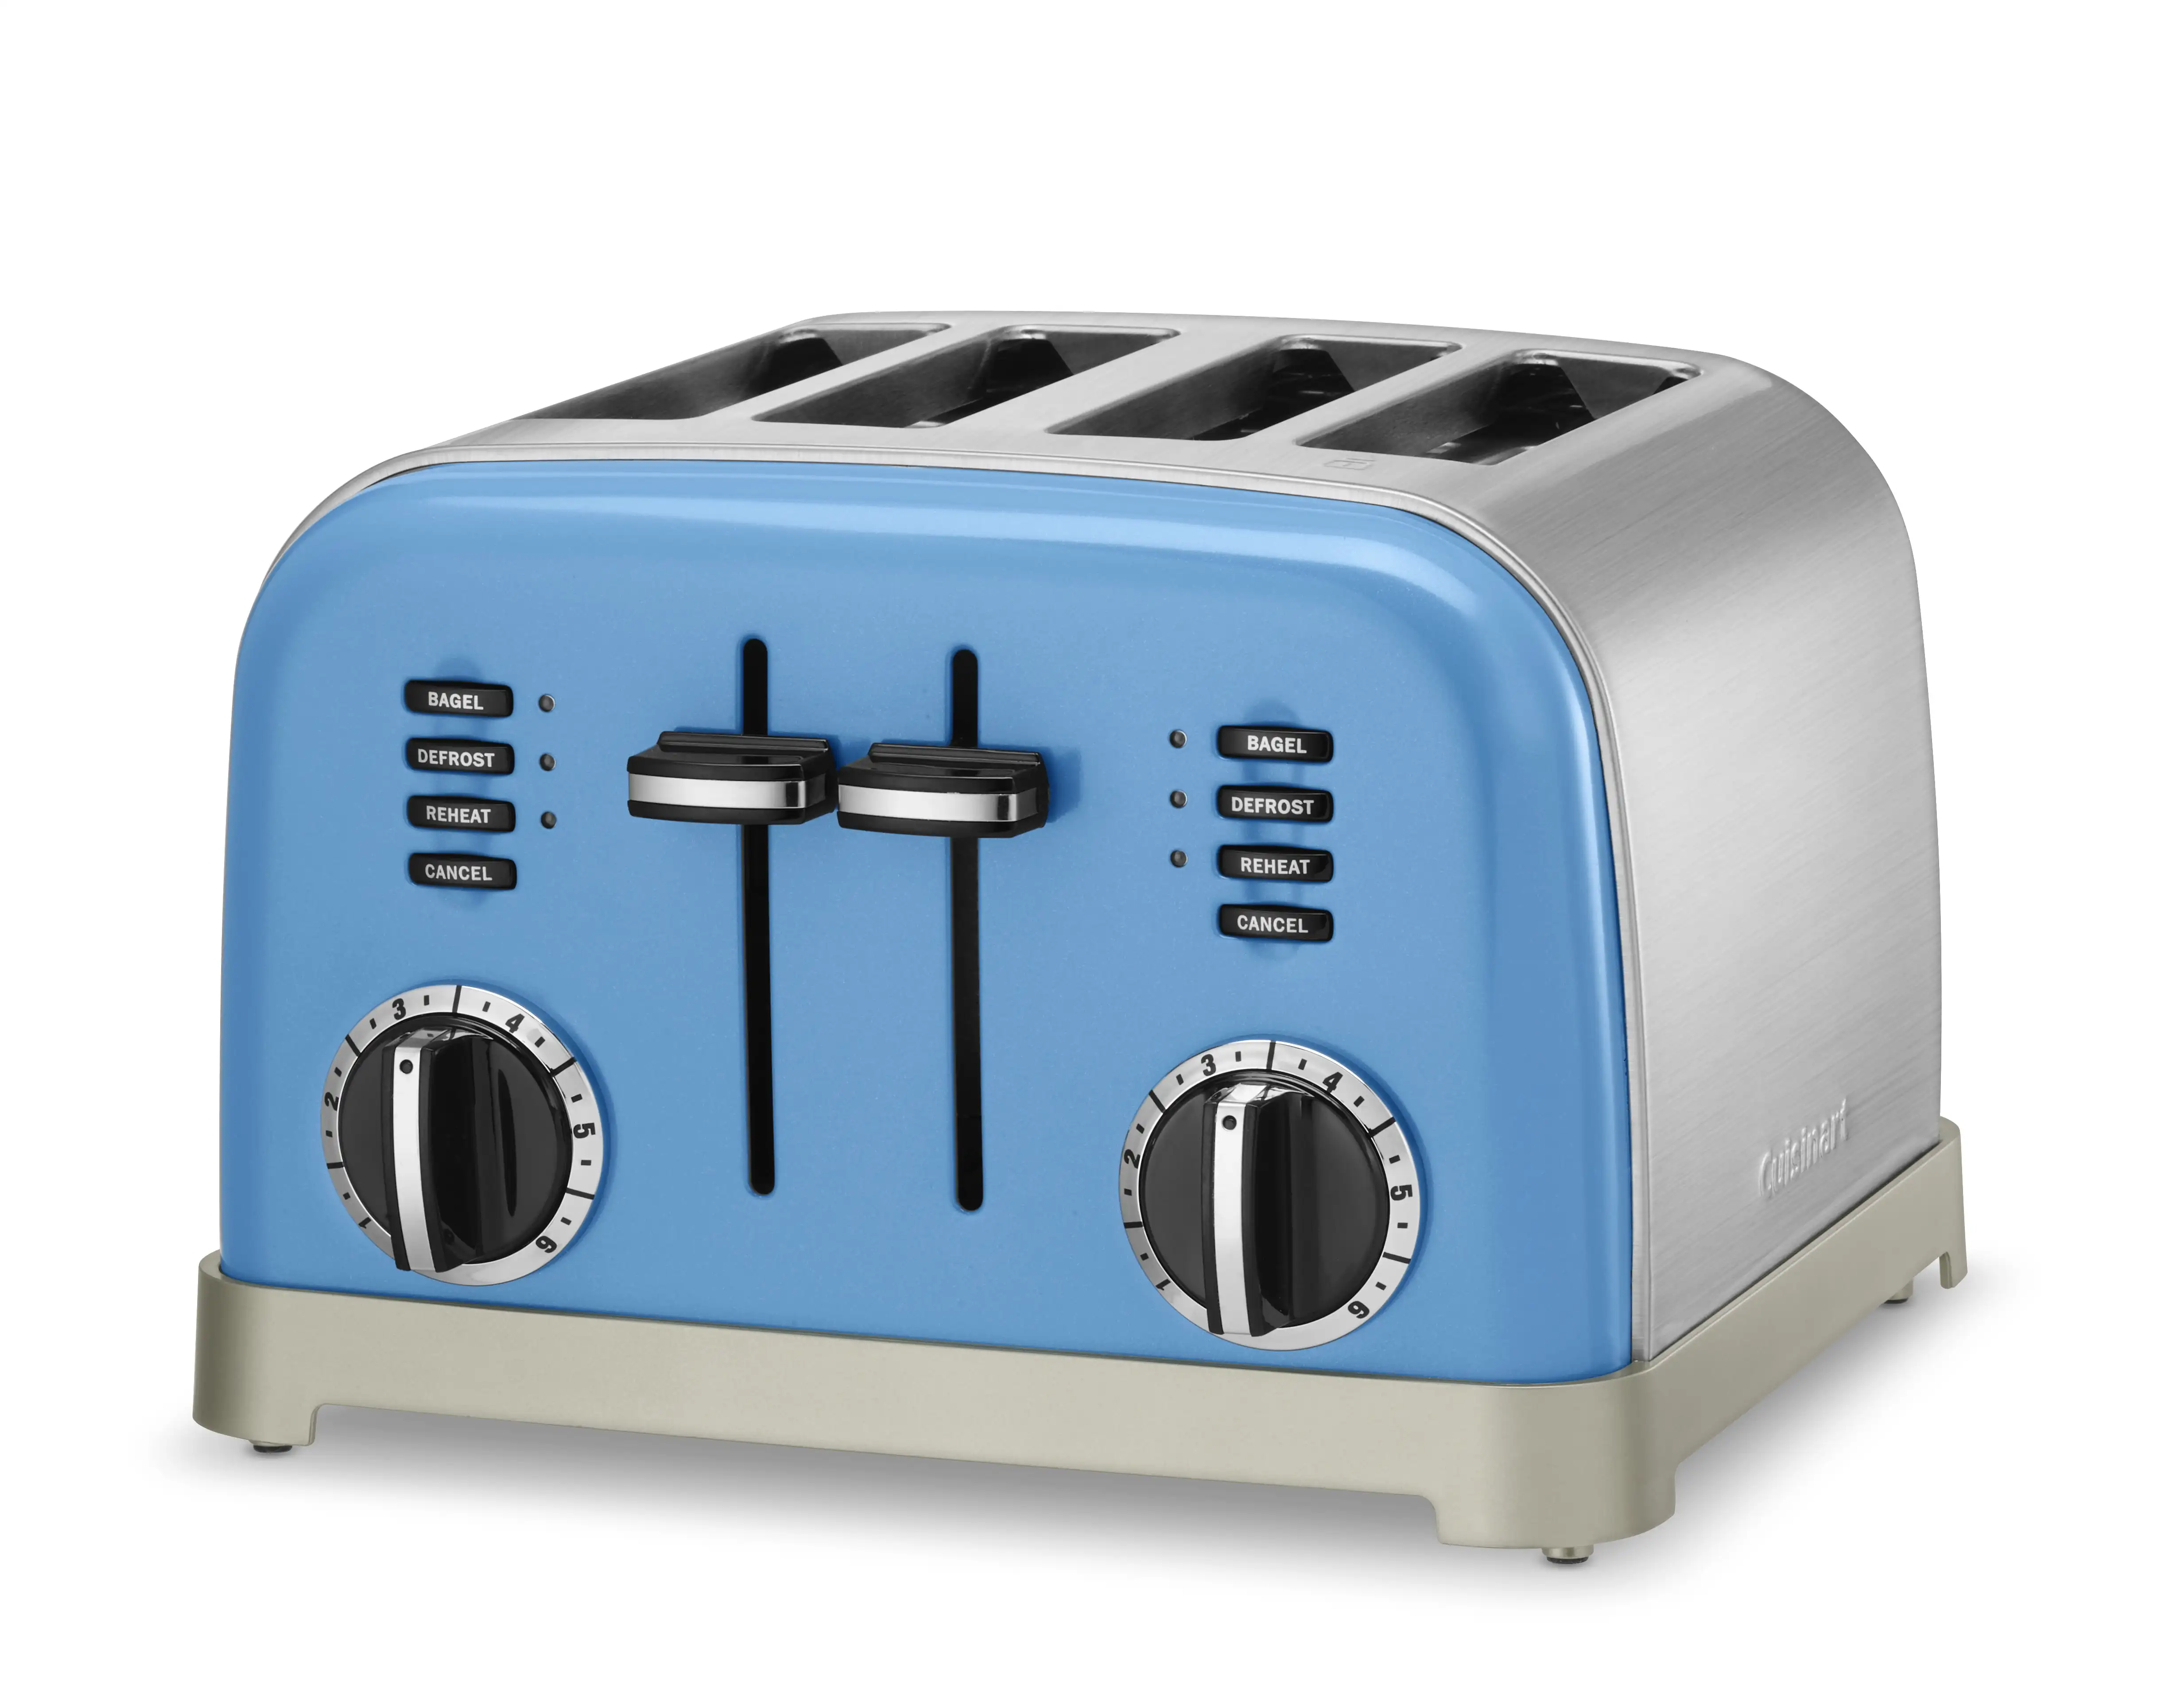 kitchen bread grill CPT-180RSB 4-Slice Metal Classic Toaster, Blue Toasting Machine